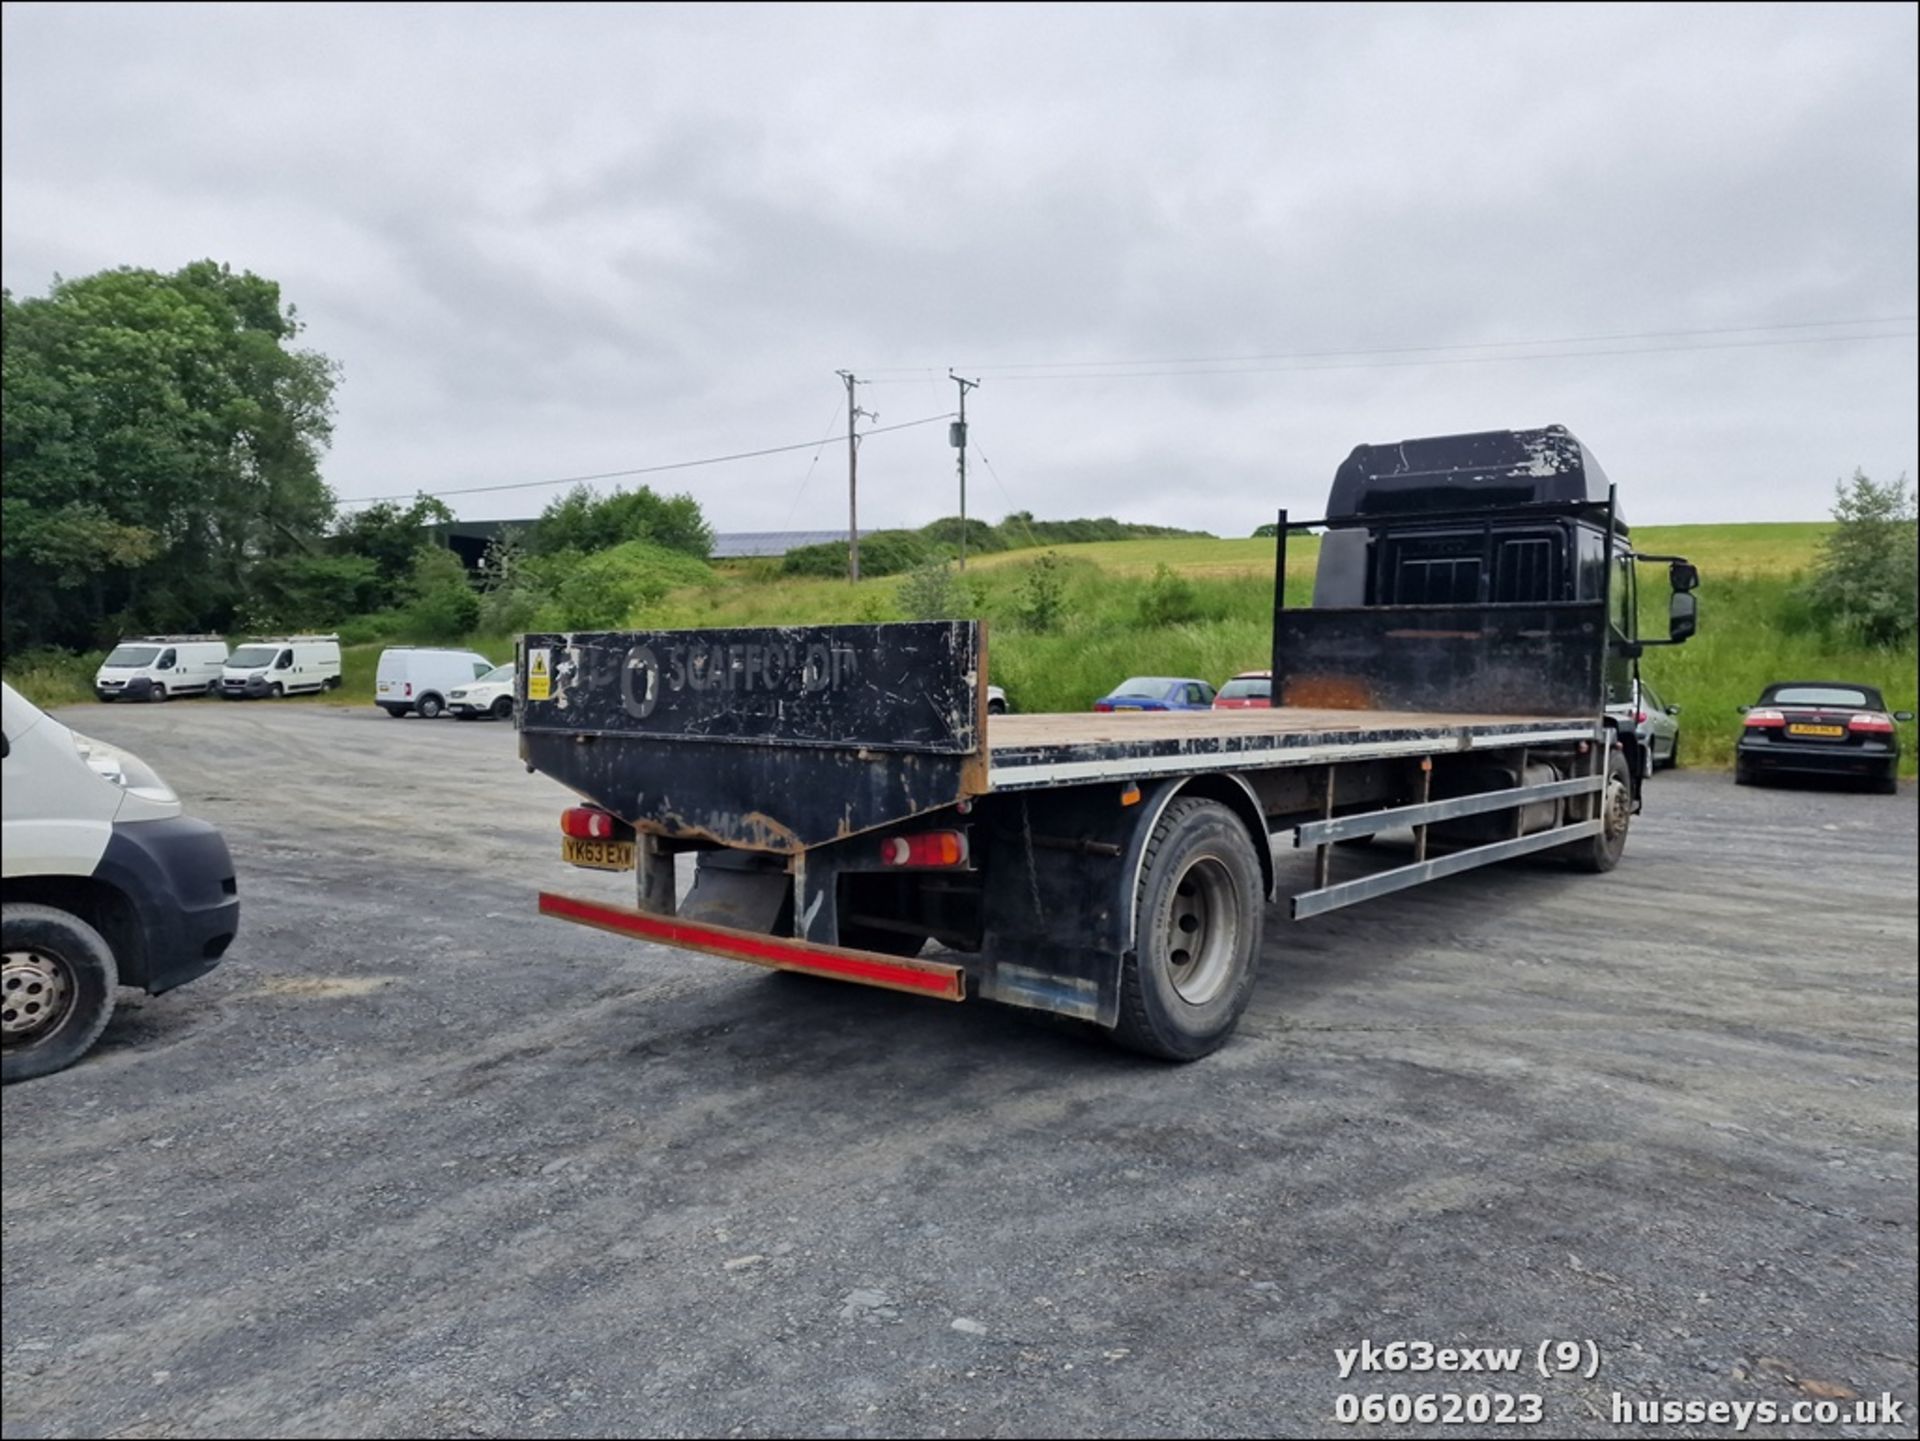 13/63 IVECO EUROCARGO (MY 2008) - 5880cc 2dr Flat Bed (Black) - Image 9 of 21